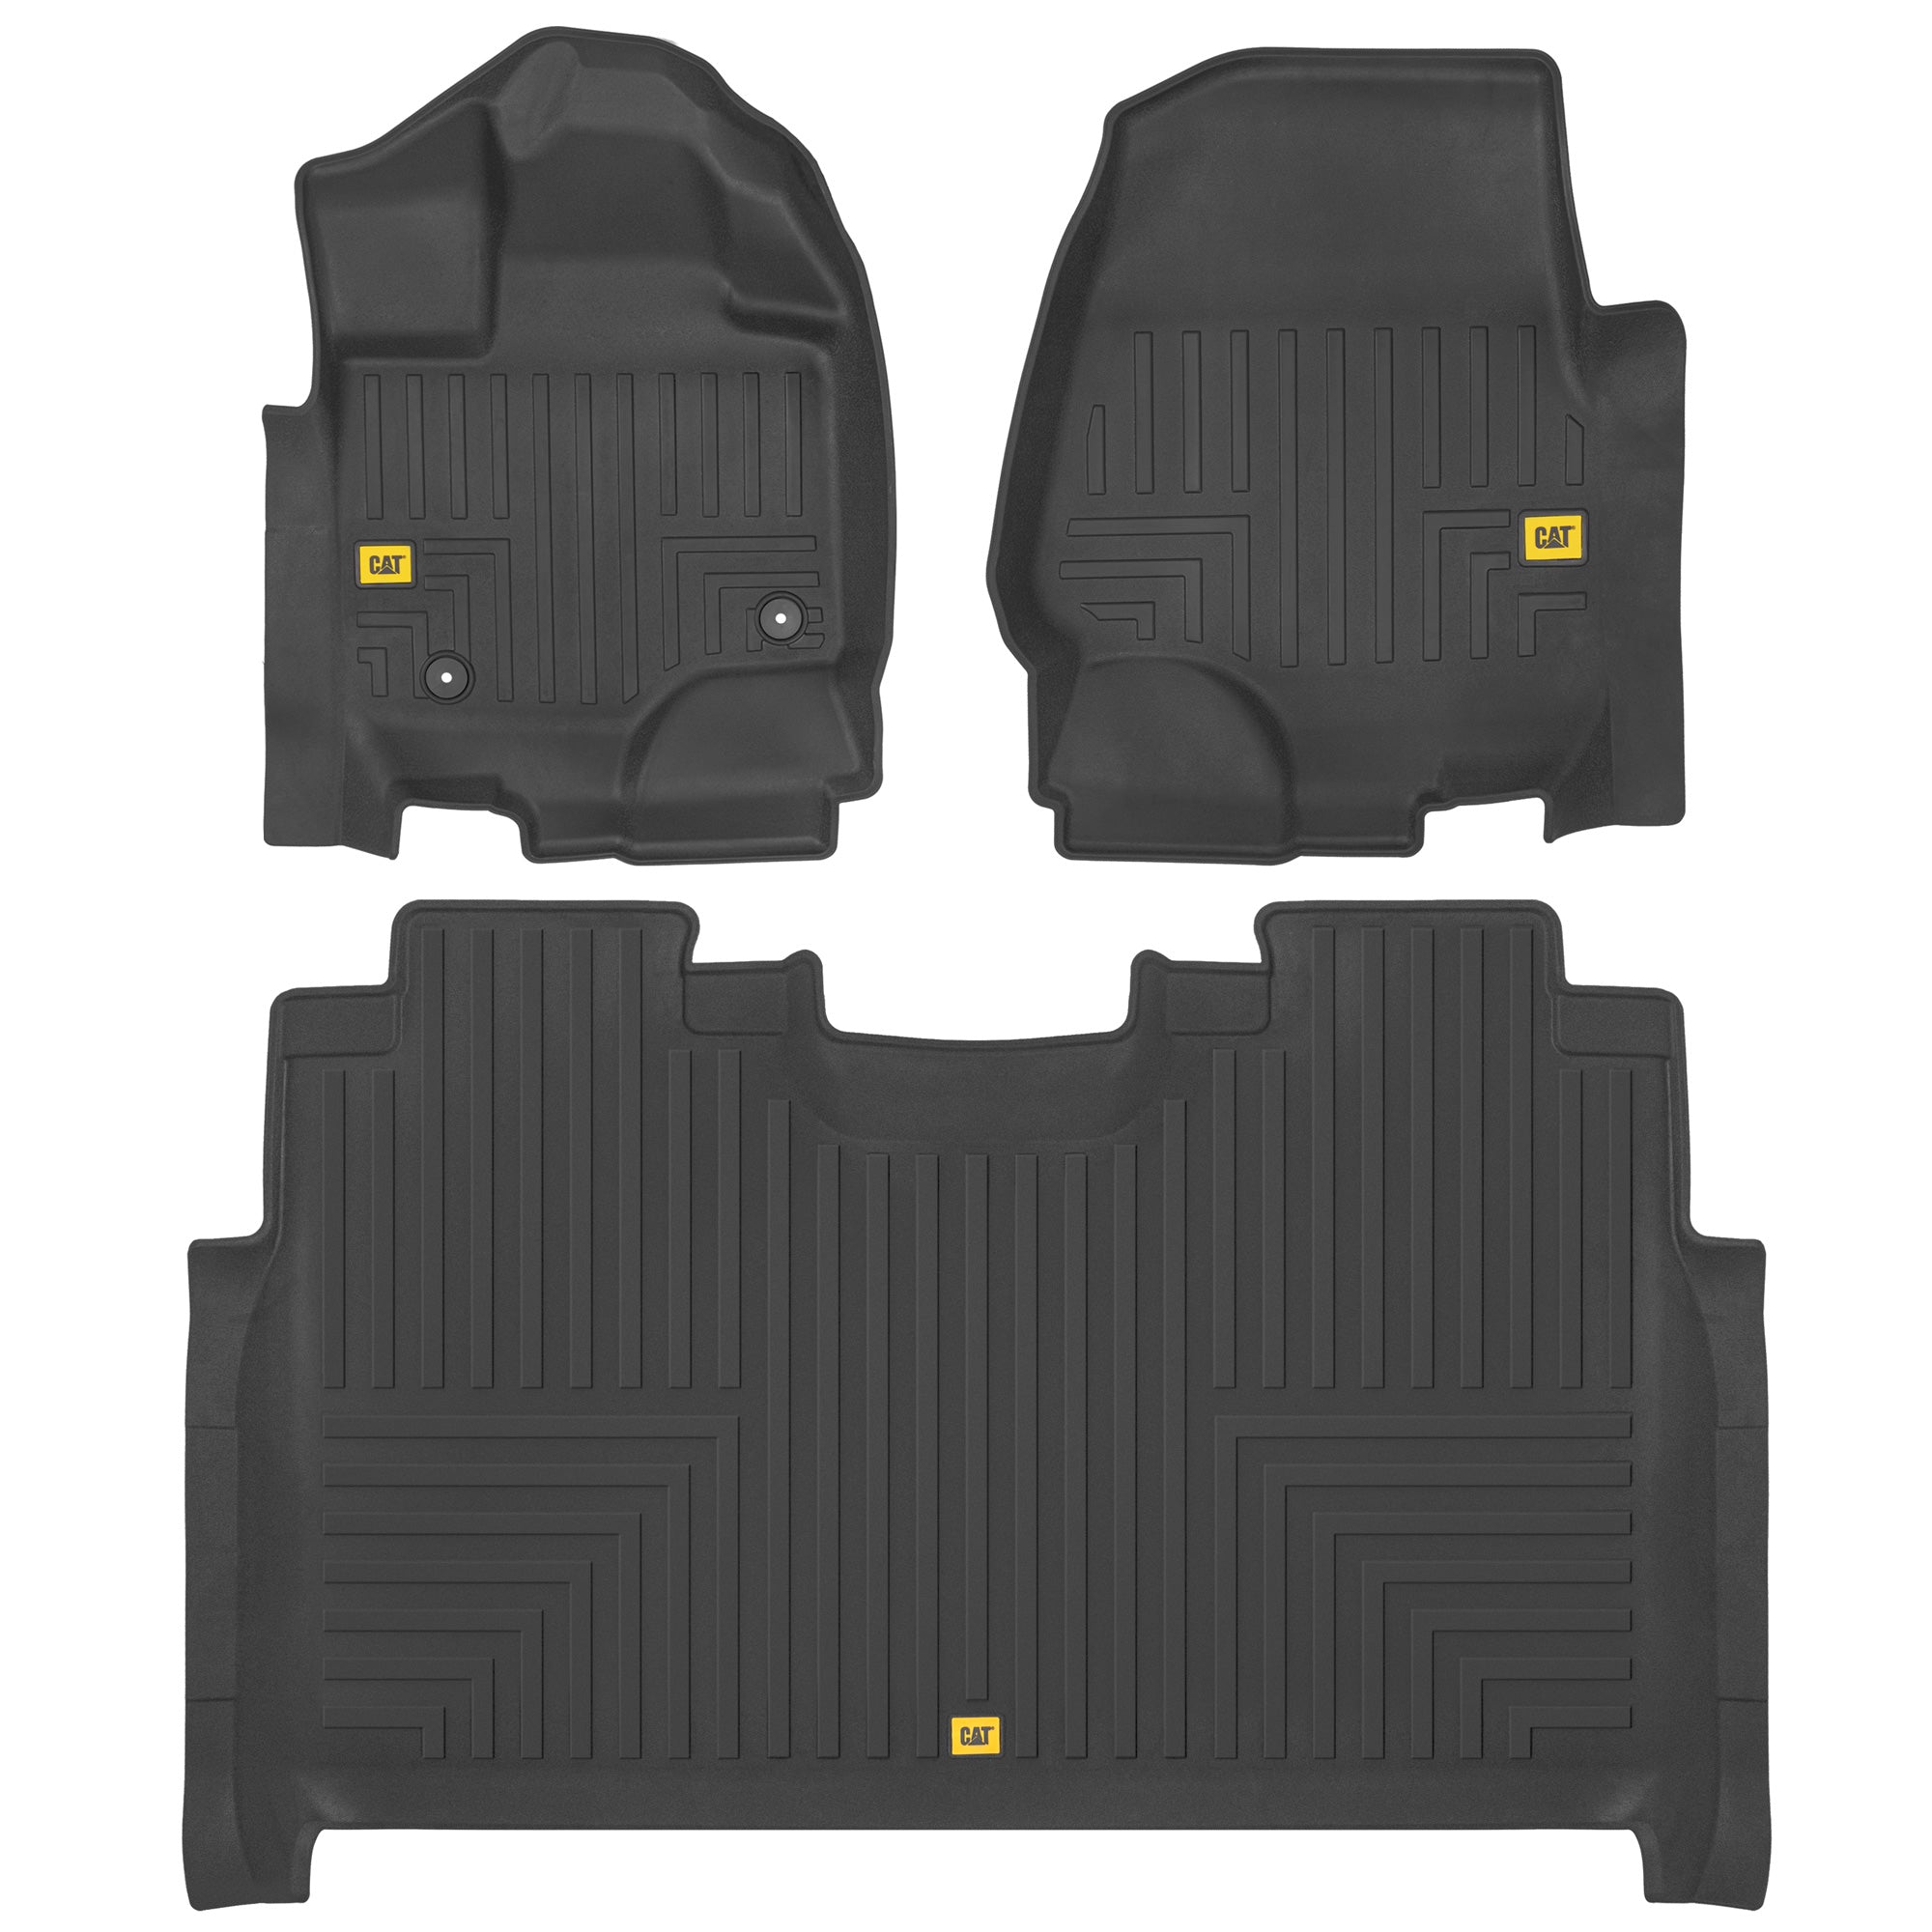 Cat® Floor Mats for 2015-2022 Ford F-150 SuperCrew Cab, Front & Rear, All Weather Protection 3D Contour Fit Liners, Black, (CAMT-3103)